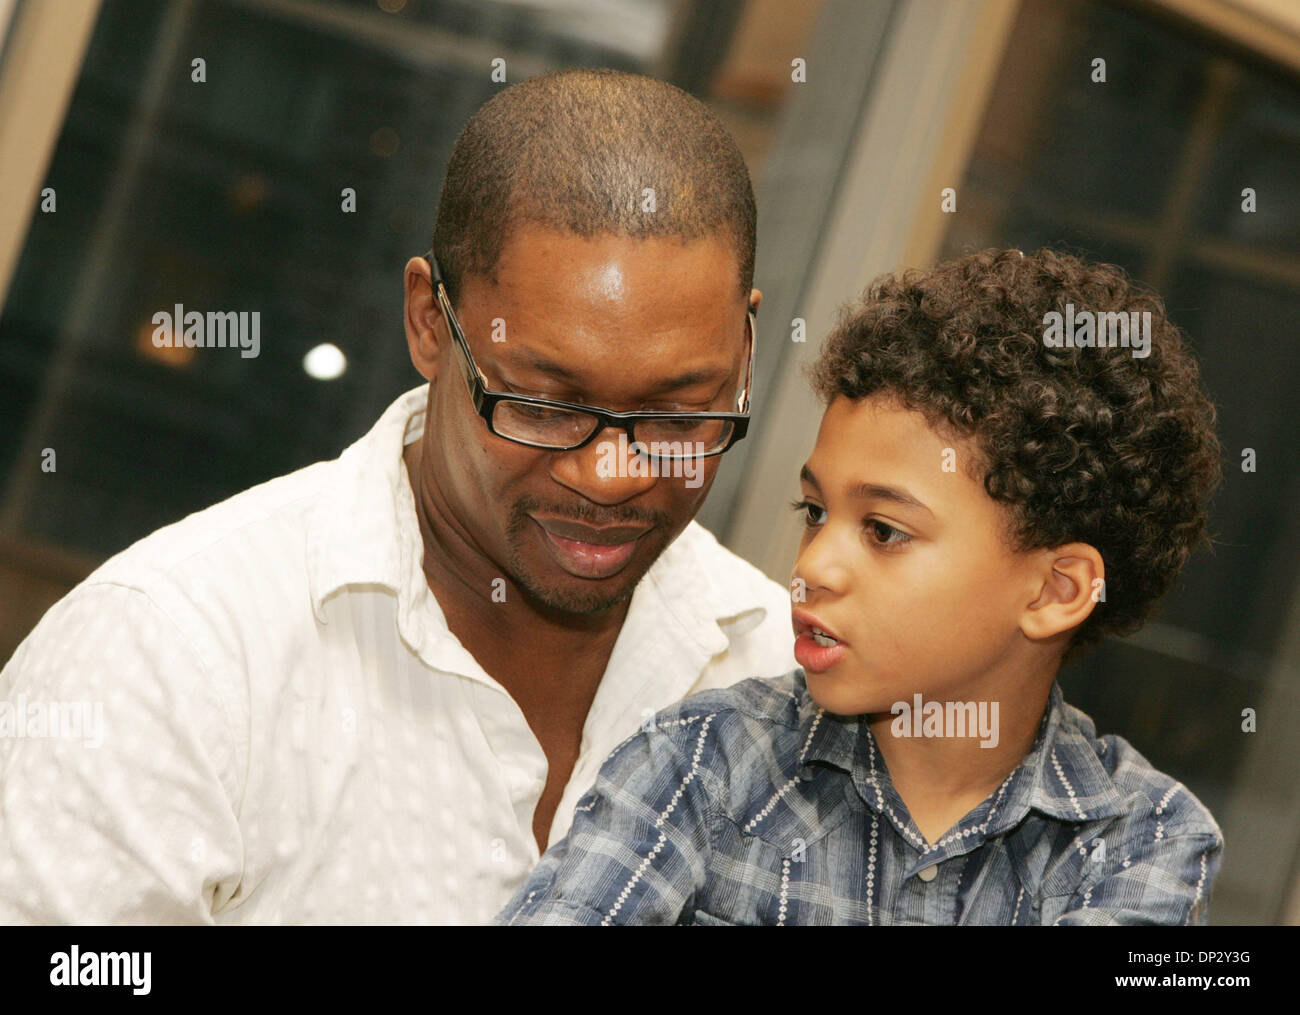 Jun 13, 2006; New York, NY, USA; Jazz saxophonist RAVI COLTRANE, son of  legendary jazz saxophonist John Coltrane ), and his son WILLIAM at the  lecture for the new book 'The House